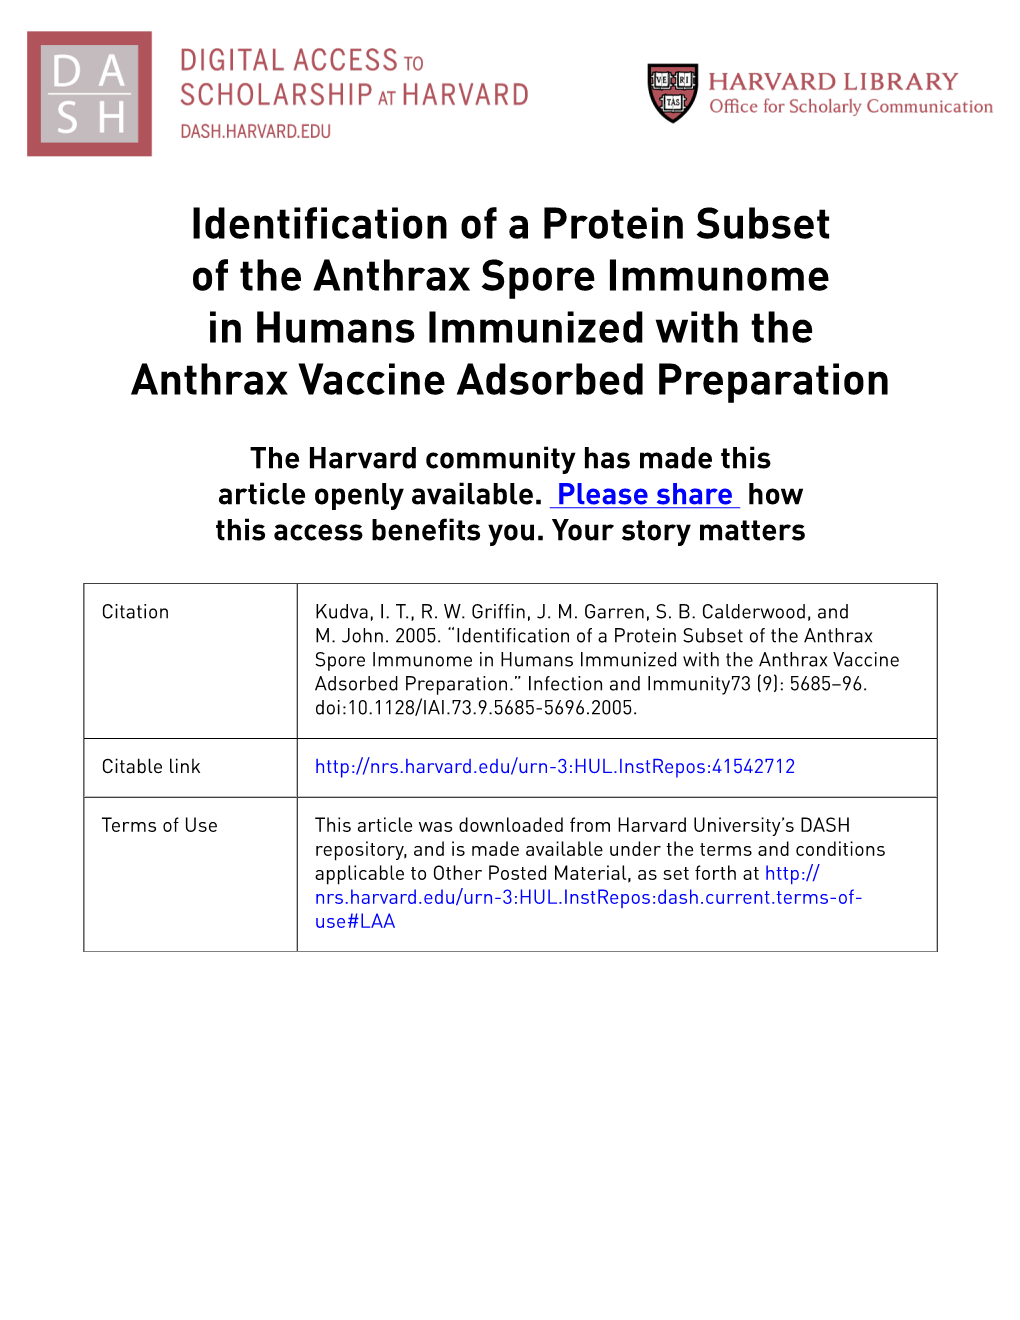 Identification of a Protein Subset of the Anthrax Spore Immunome in Humans Immunized with the Anthrax Vaccine Adsorbed Preparation